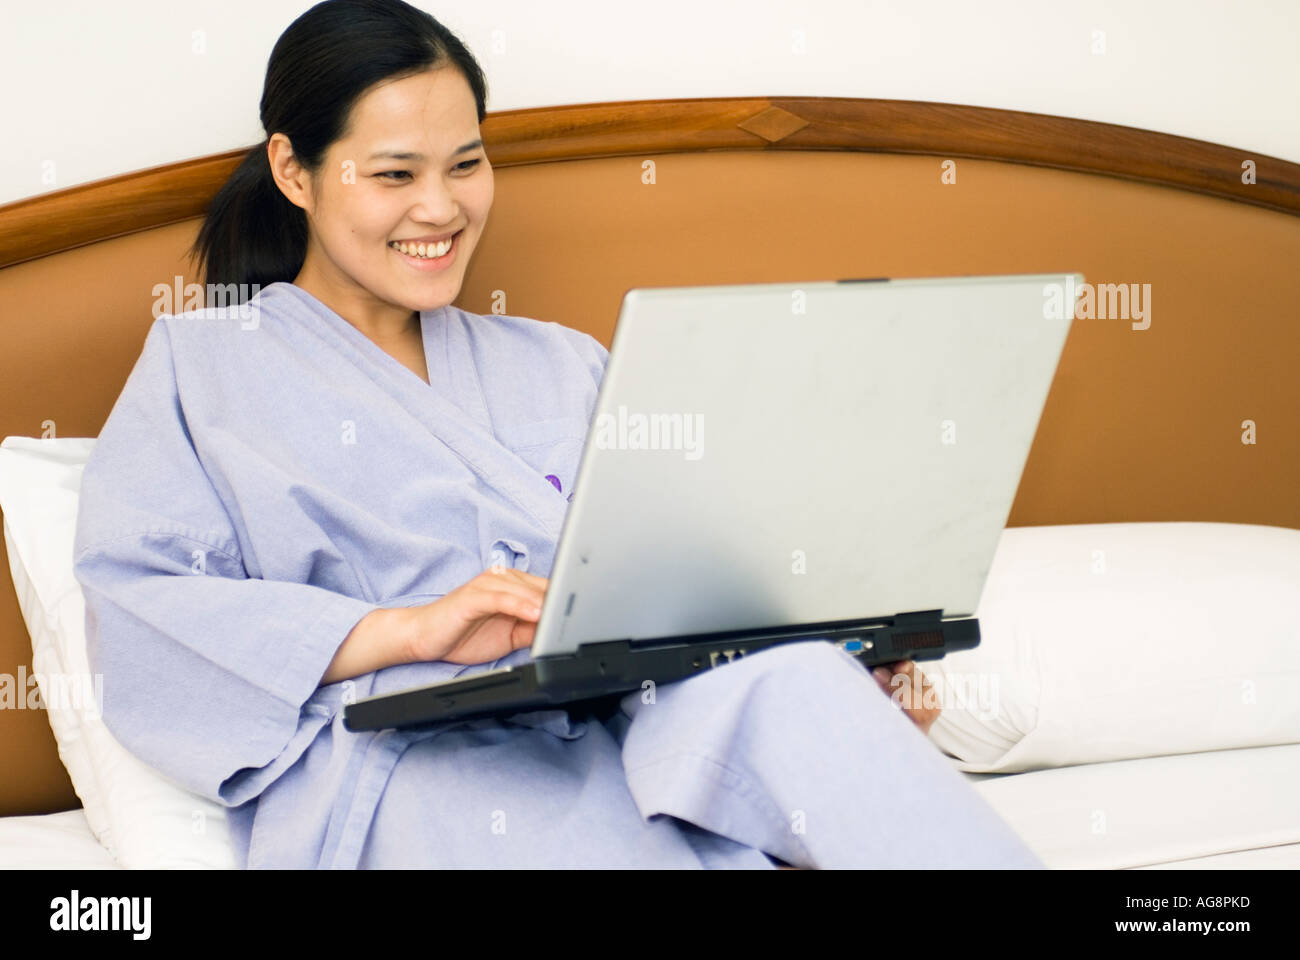 Chinese Young Woman Laying On Bed In Hotel Room Working On Laptop Computer Bangkok Thailand Stock Photo